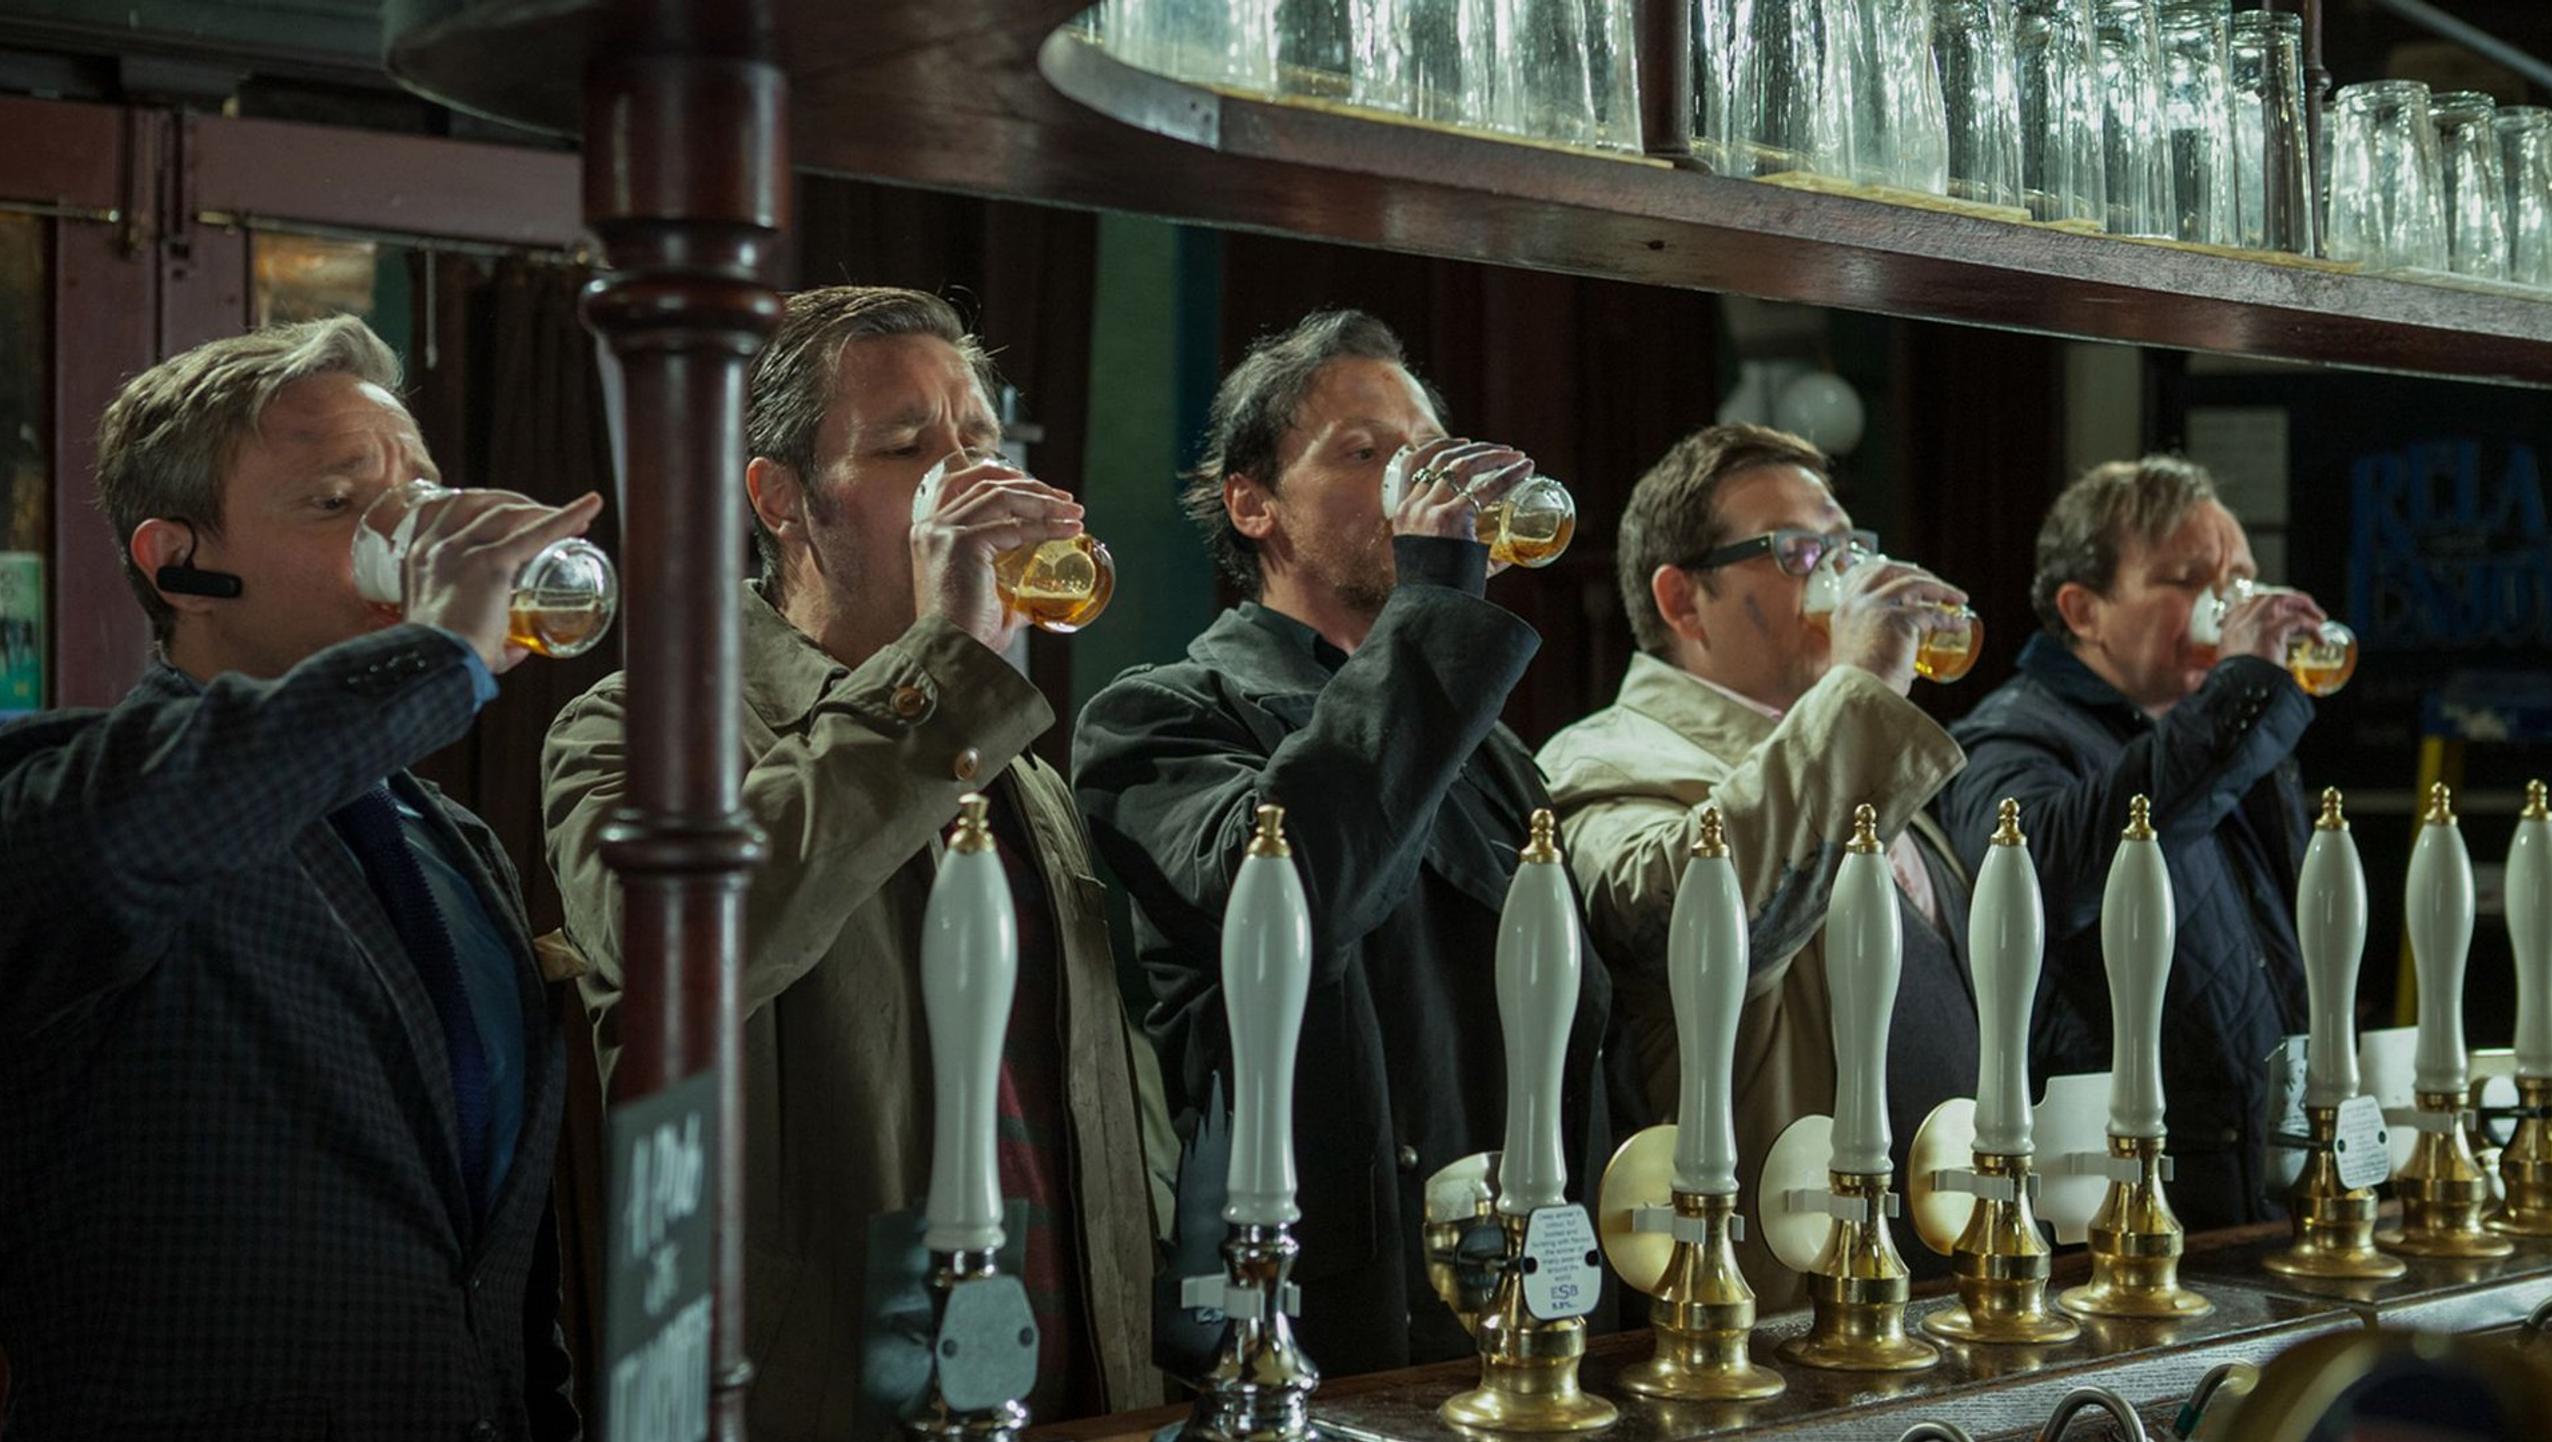 People 2552x1442 The World's End (movie) Martin Freeman Eddie Marsan Nick Frost Paddy Considine Simon Pegg men beer bar frontal view group of people